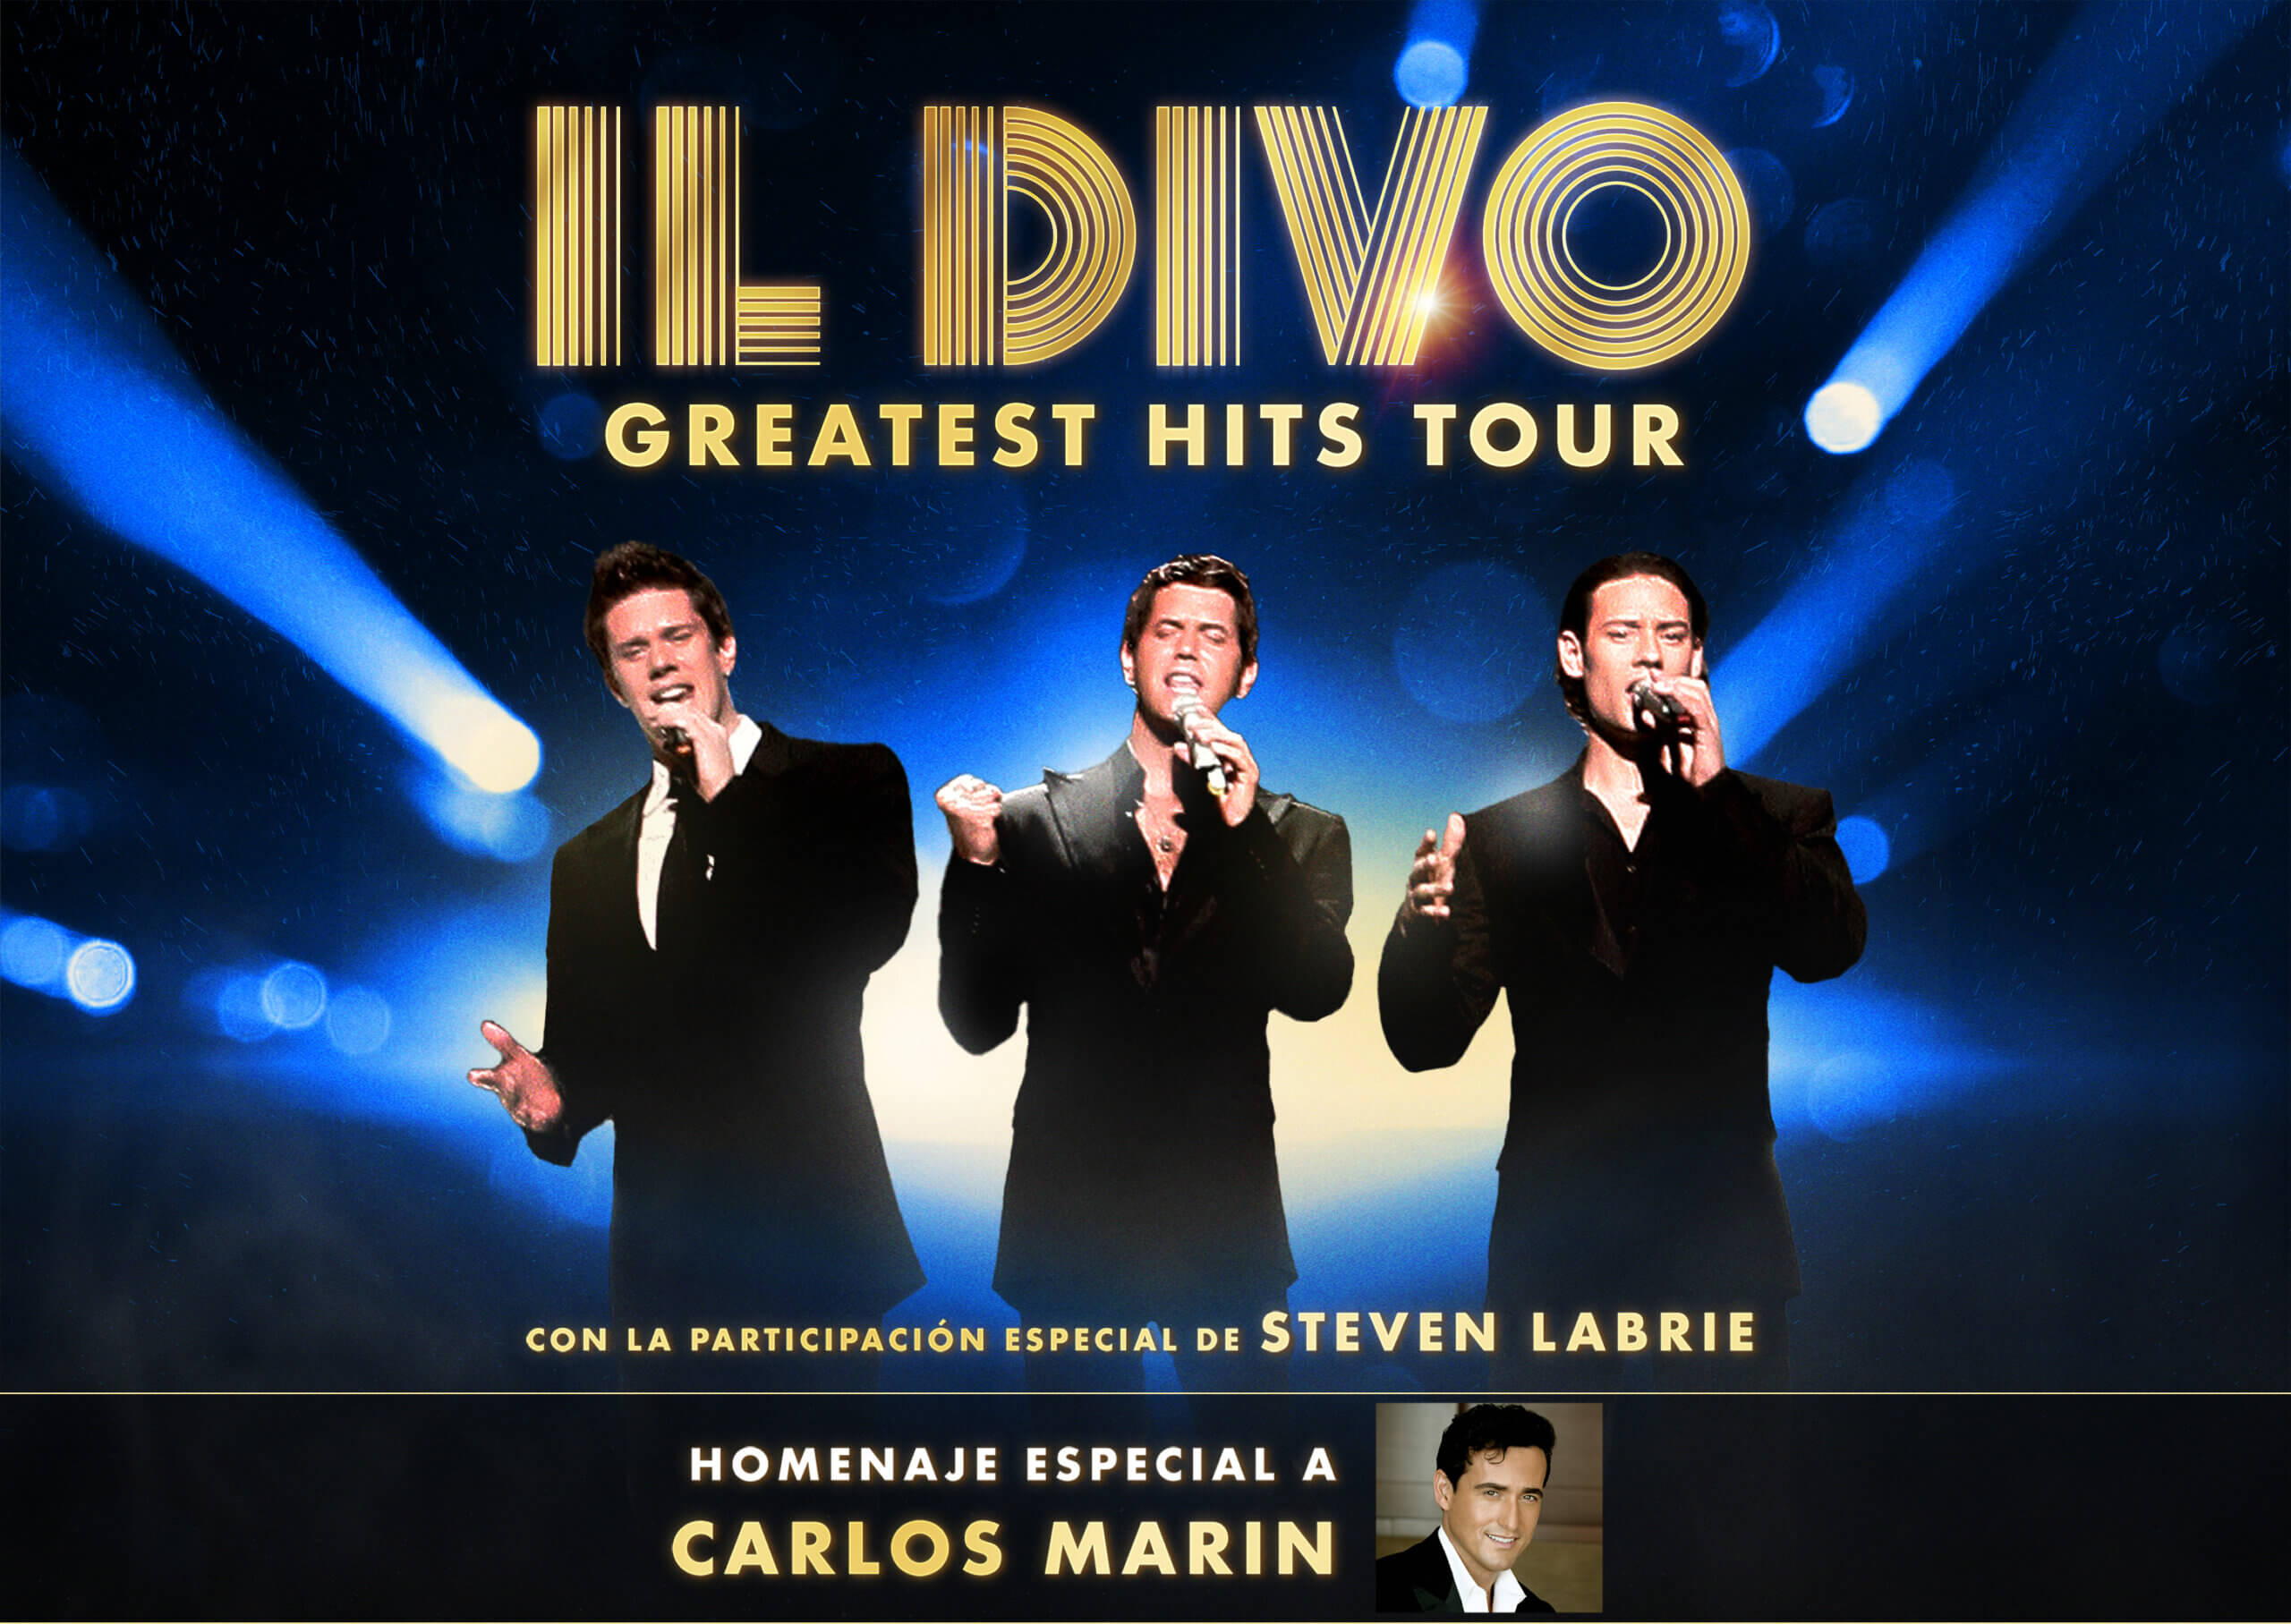 Il Divo will play a concert in Lima, Peru, with a tribute to the late Carlos Marín